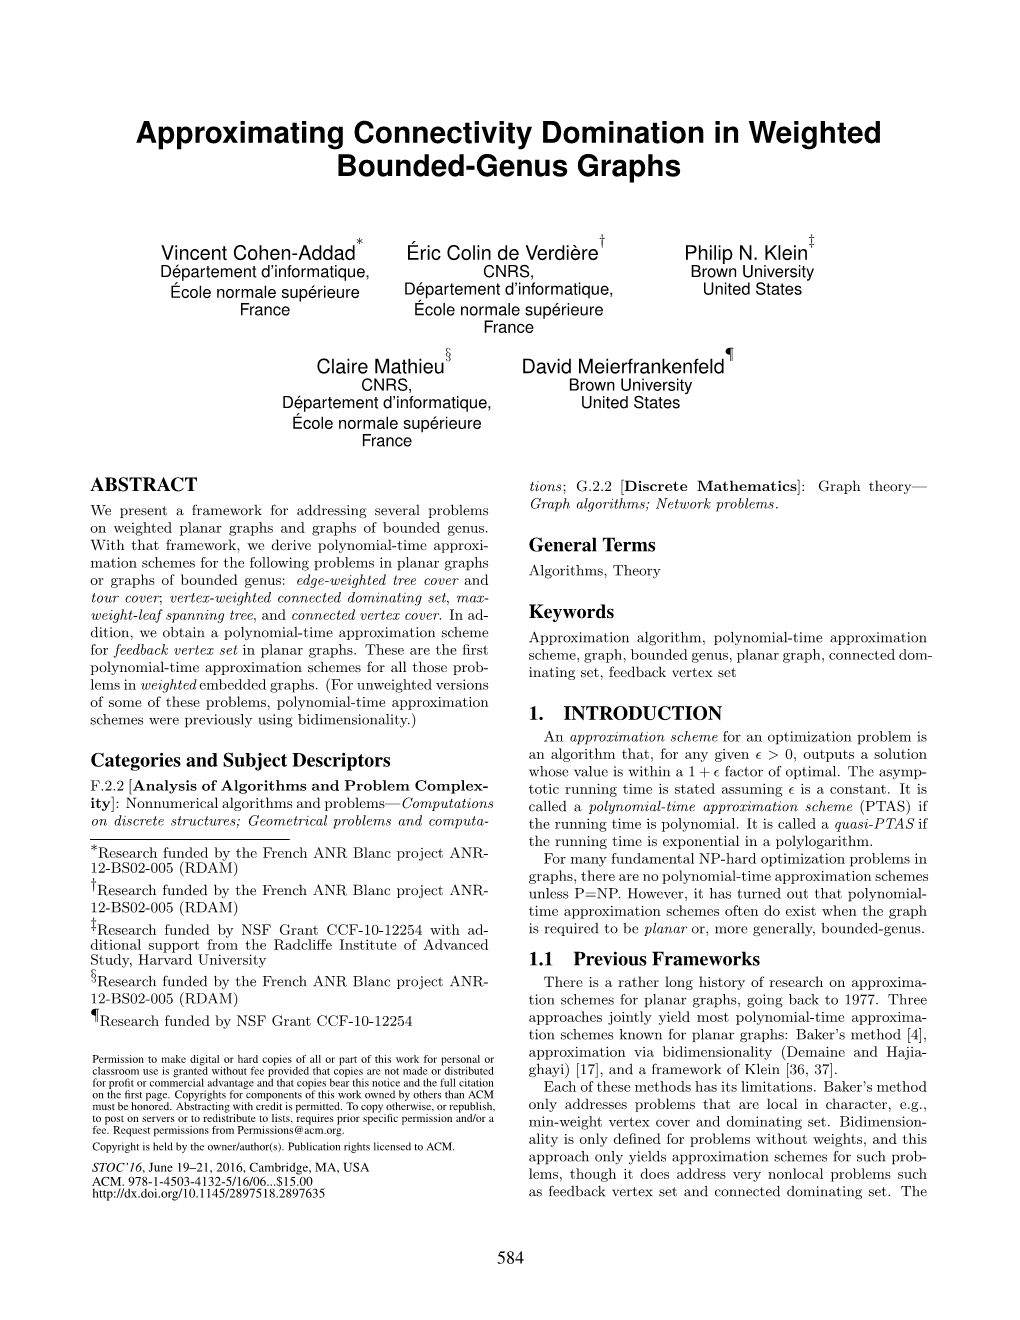 Approximating Connectivity Domination in Weighted Bounded-Genus Graphs